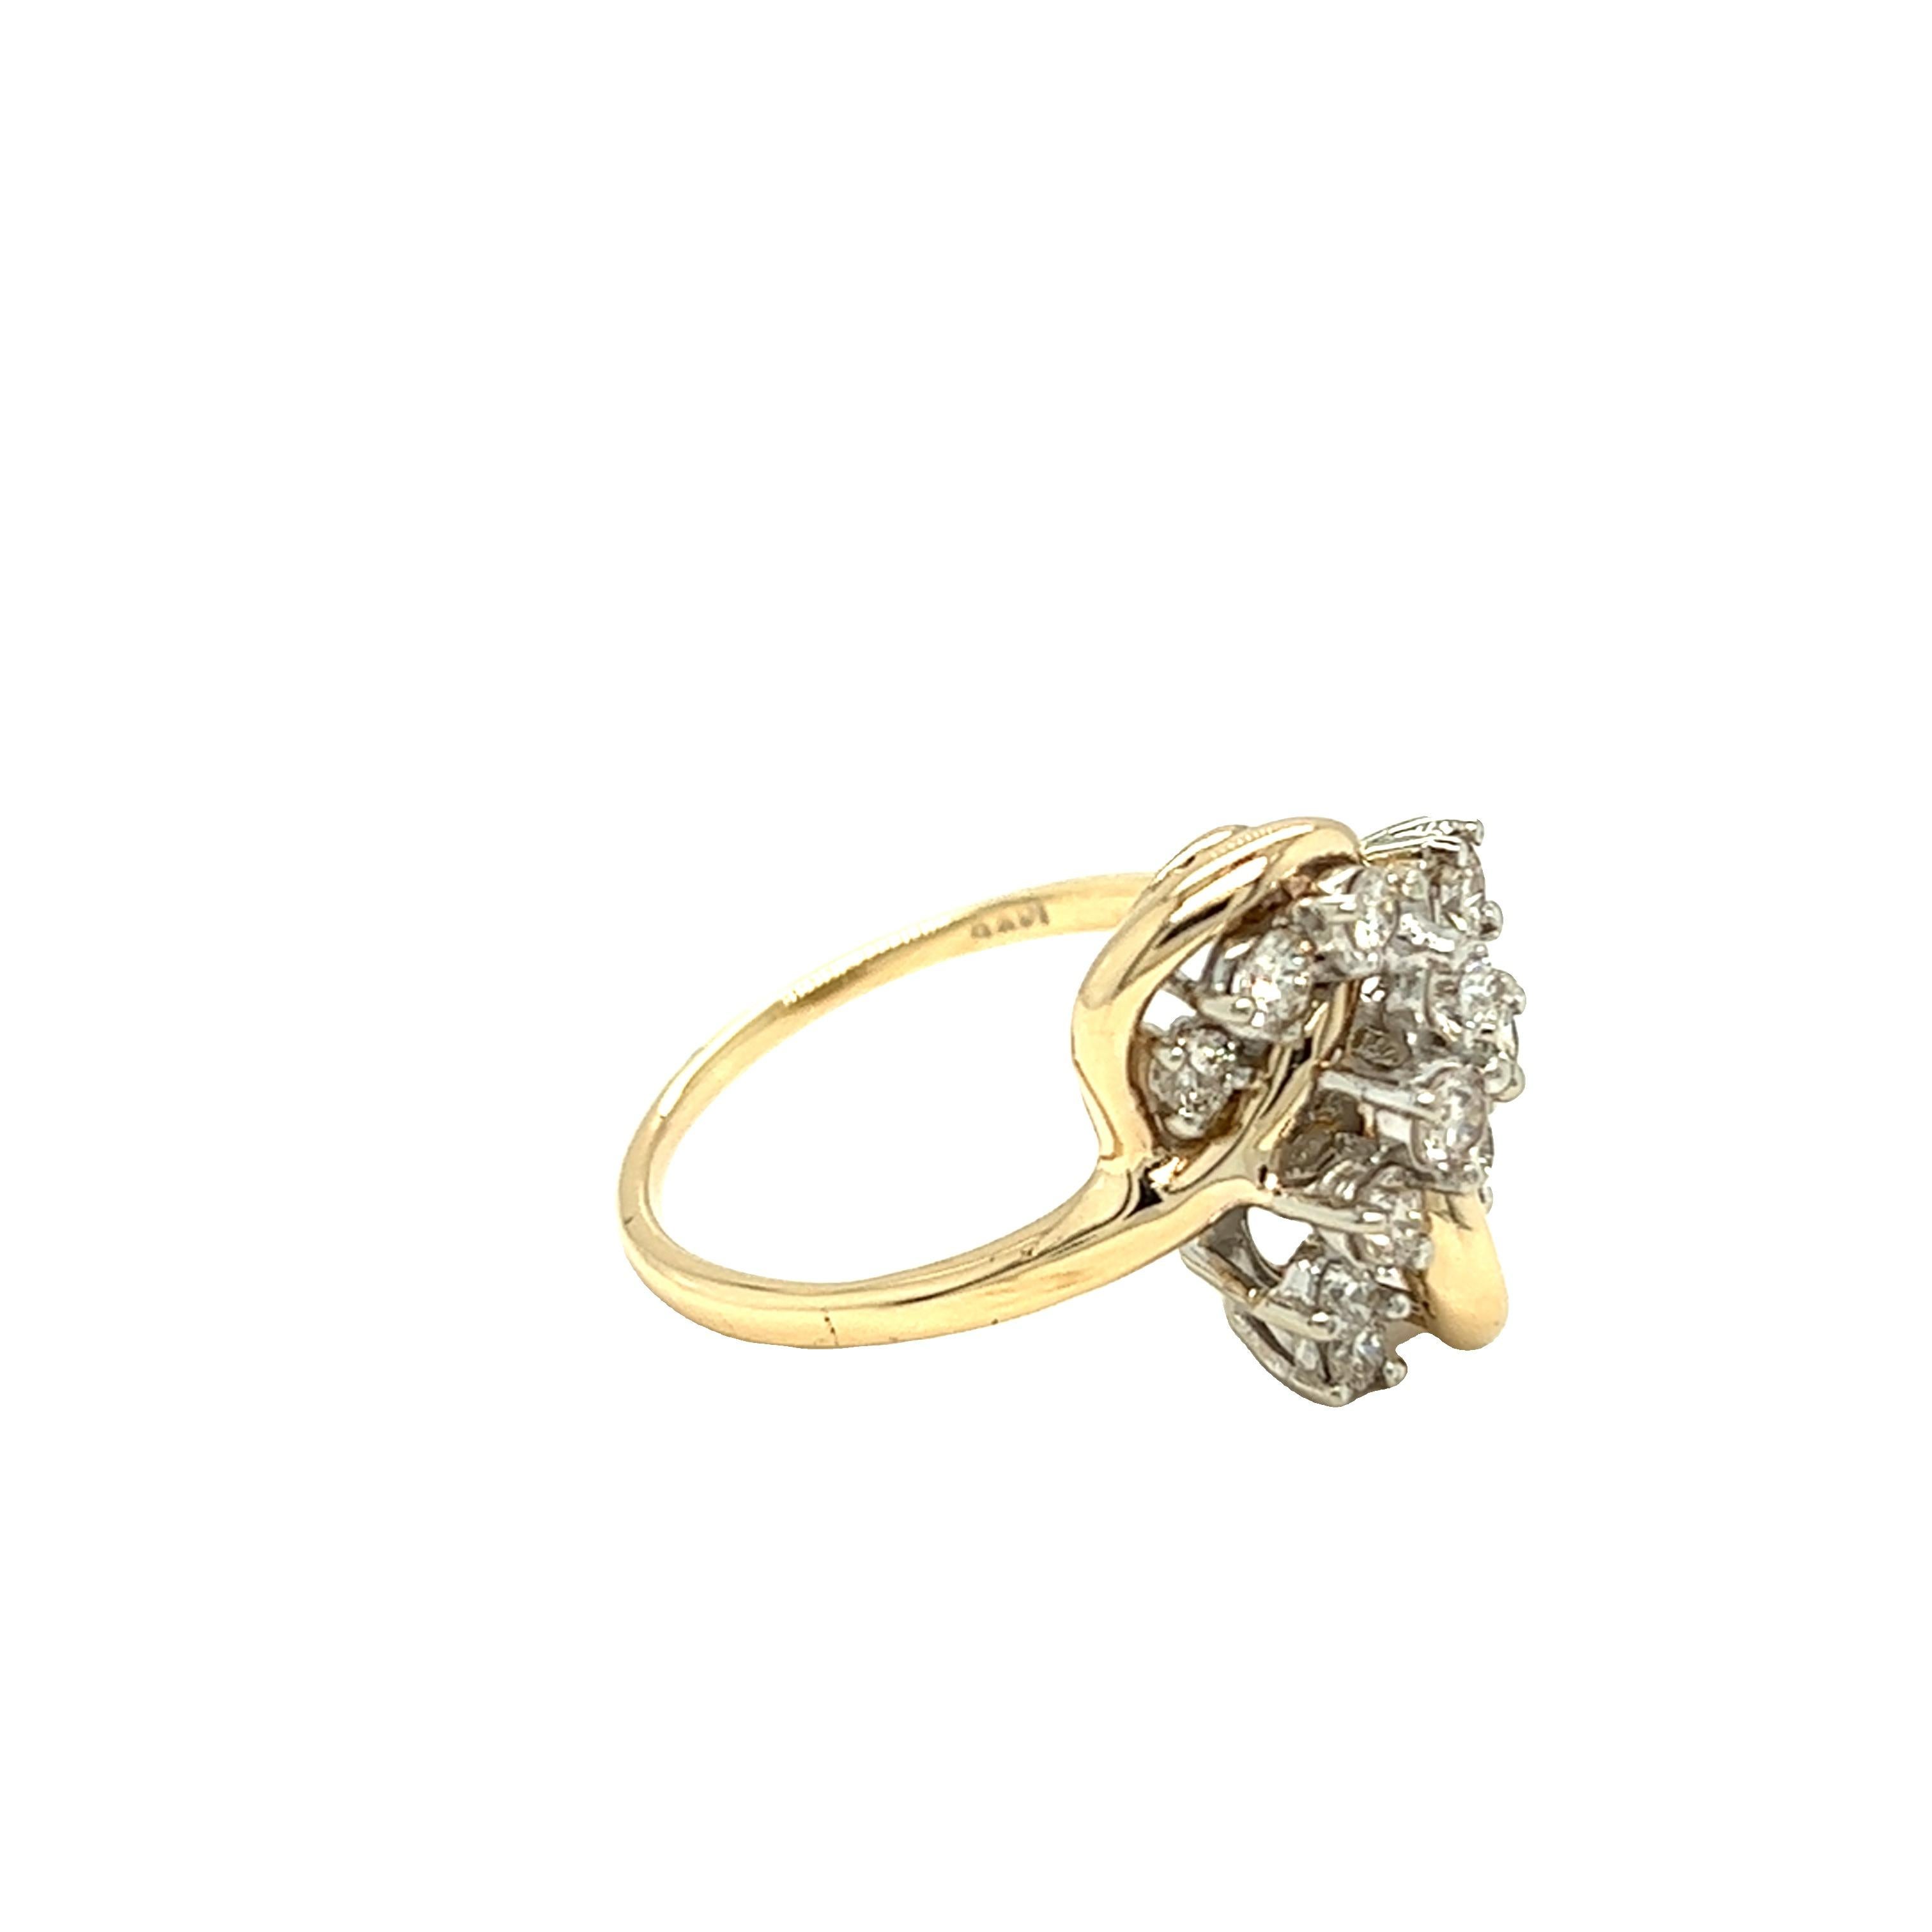 Vintage Swirl Cluster Diamond Ring 14k White and Yellow Gold In Excellent Condition For Sale In beverly hills, CA